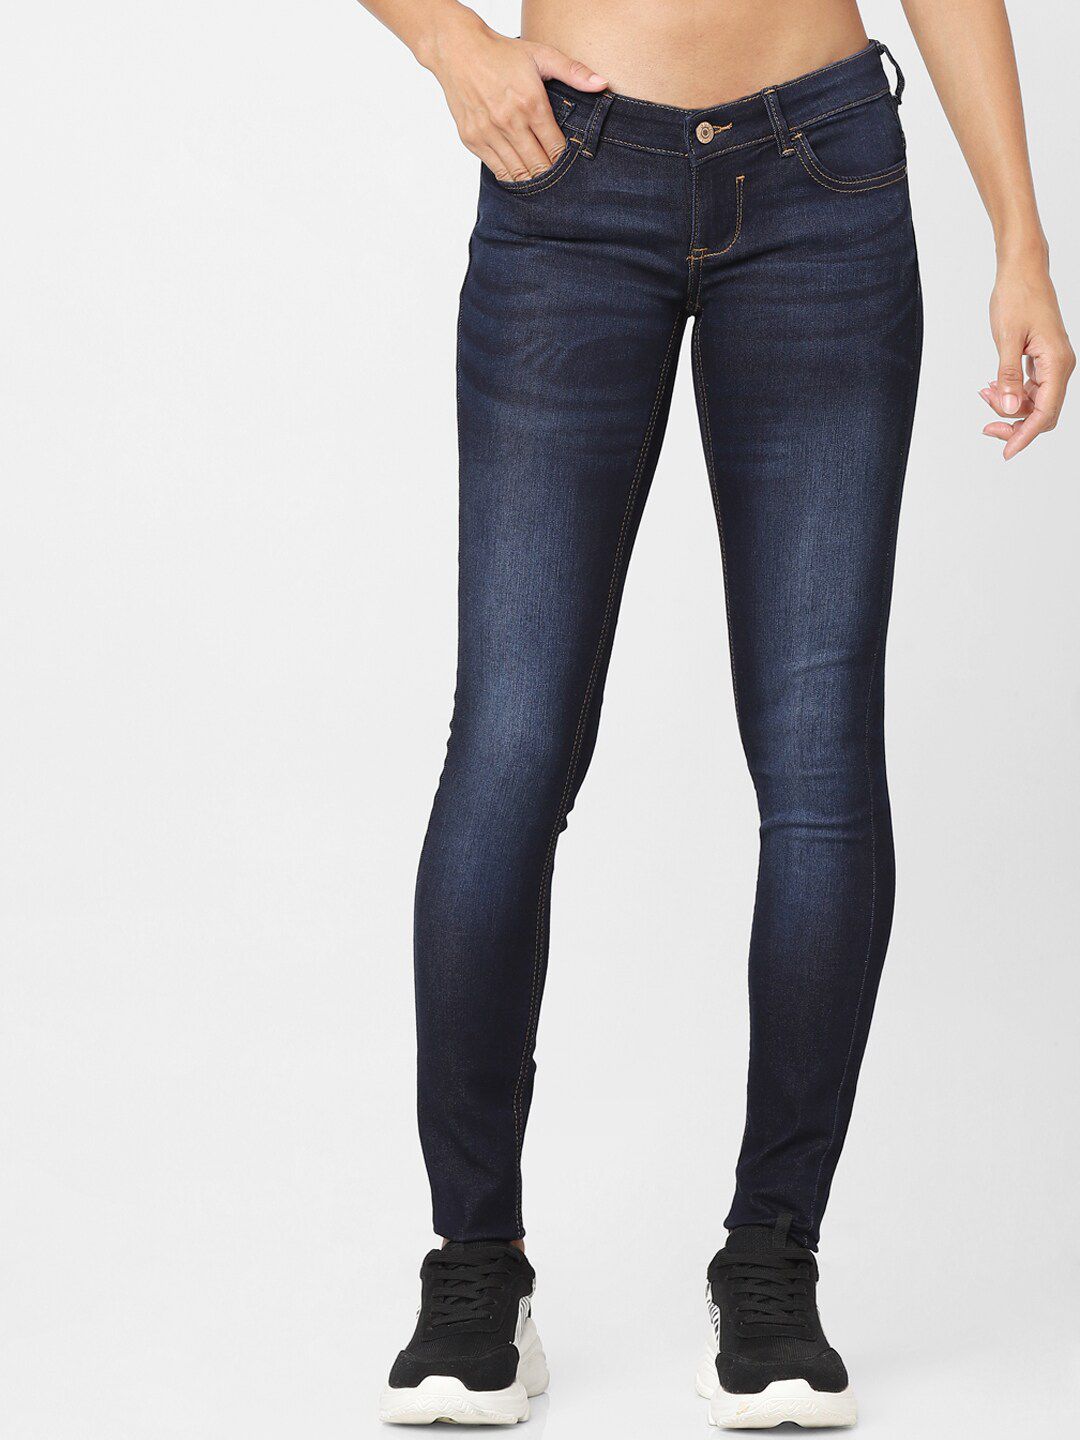 ONLY Women Blue Skinny Fit Low-Rise Light Fade Jeans Price in India